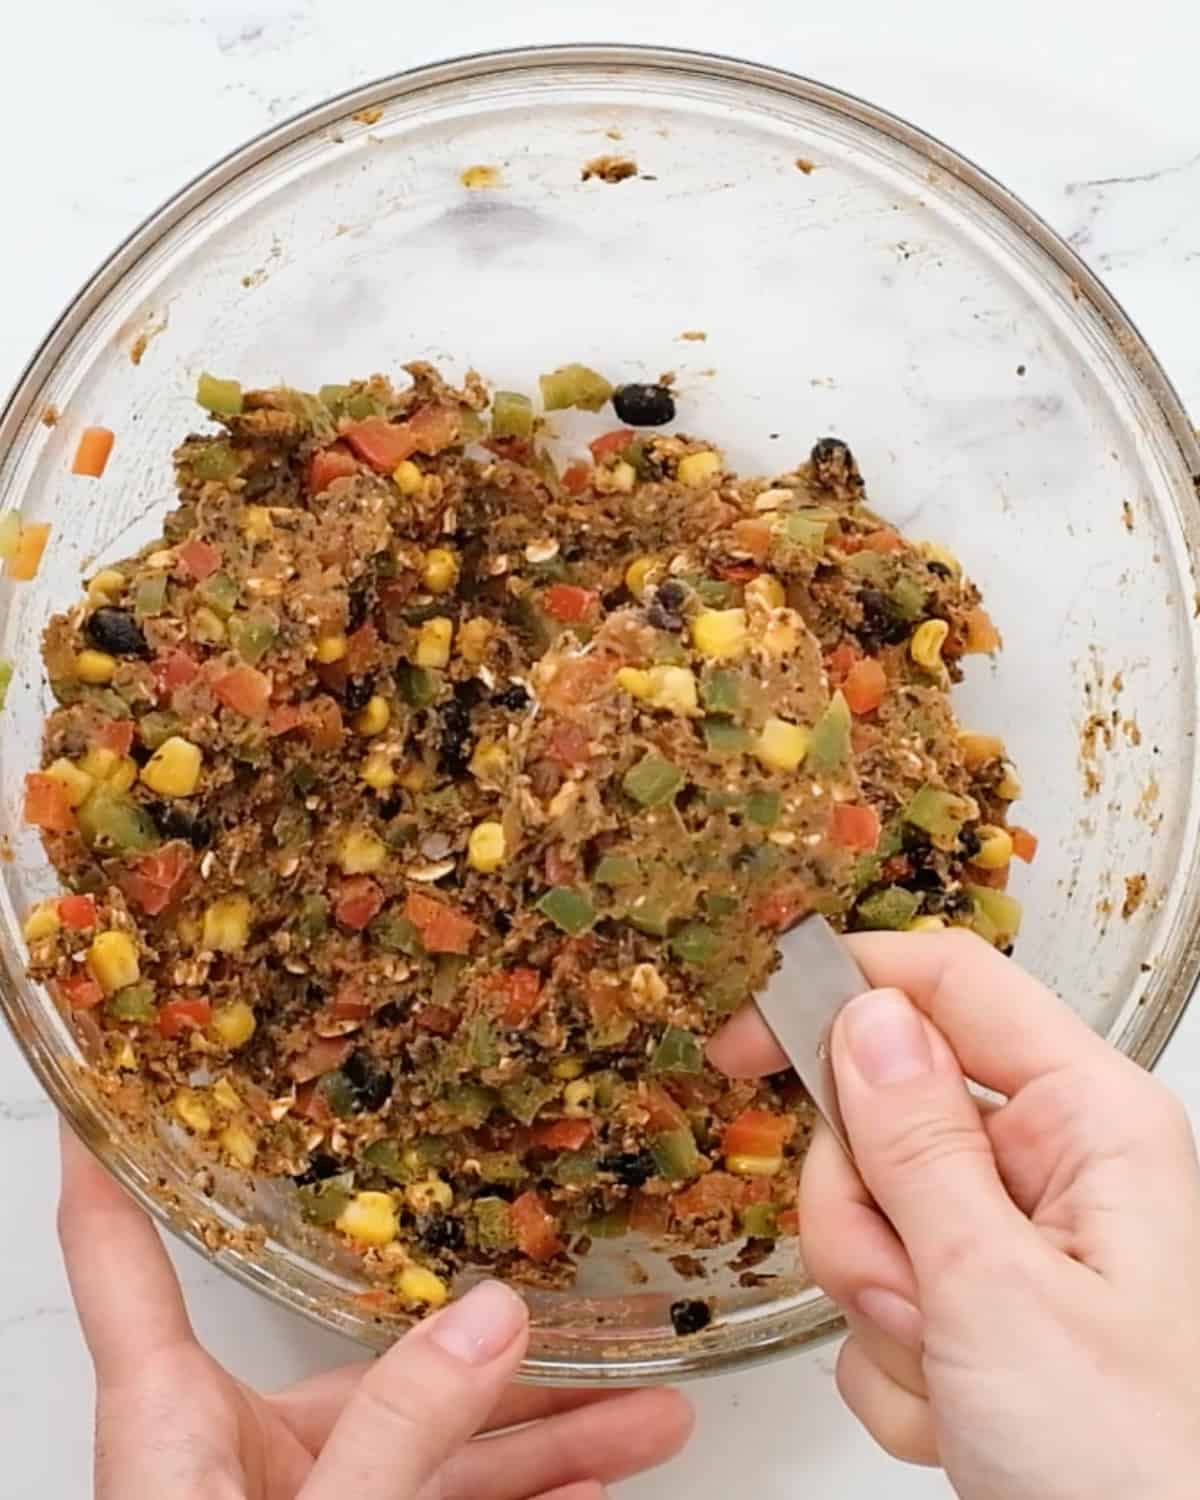 How to Make Sweet Potato Black Bean Burgers - measuring out burgers with a measuring cup